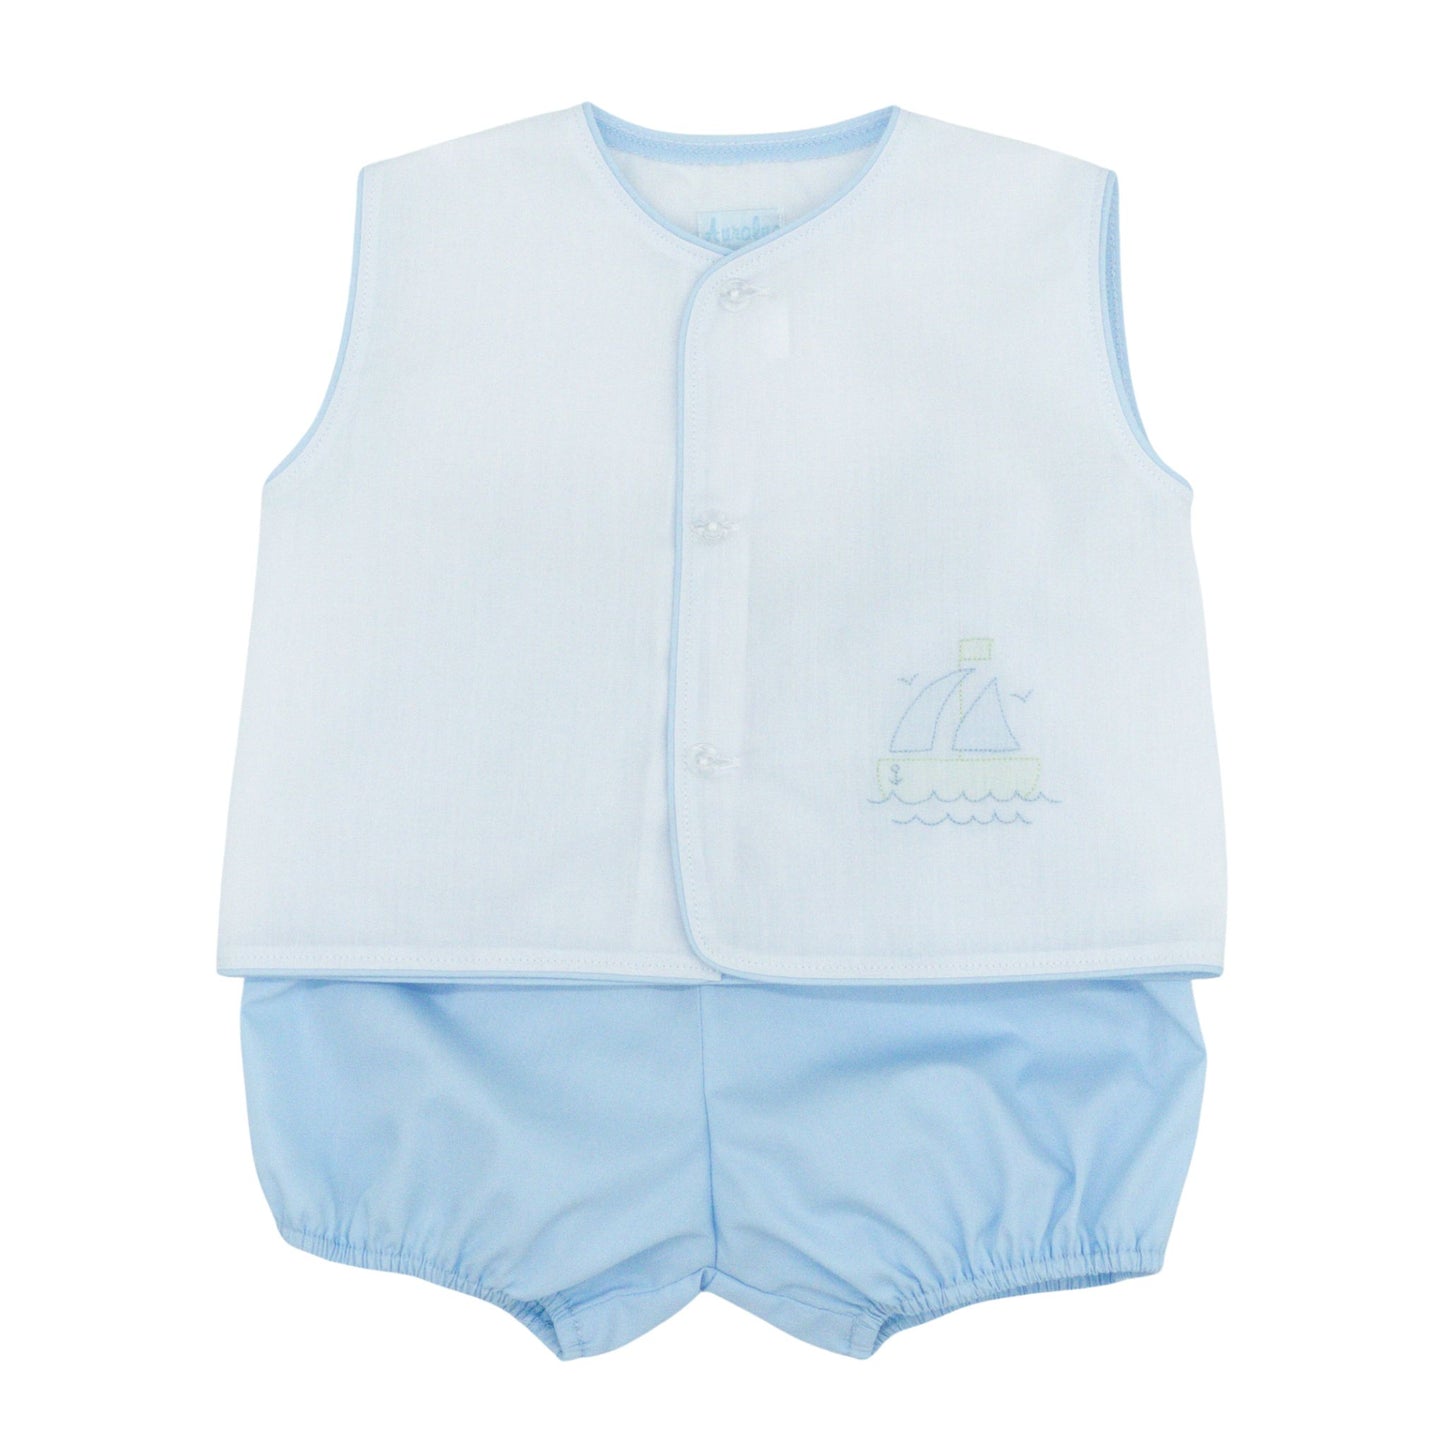 Boys Diaper Set with Boat Hand-embroidery